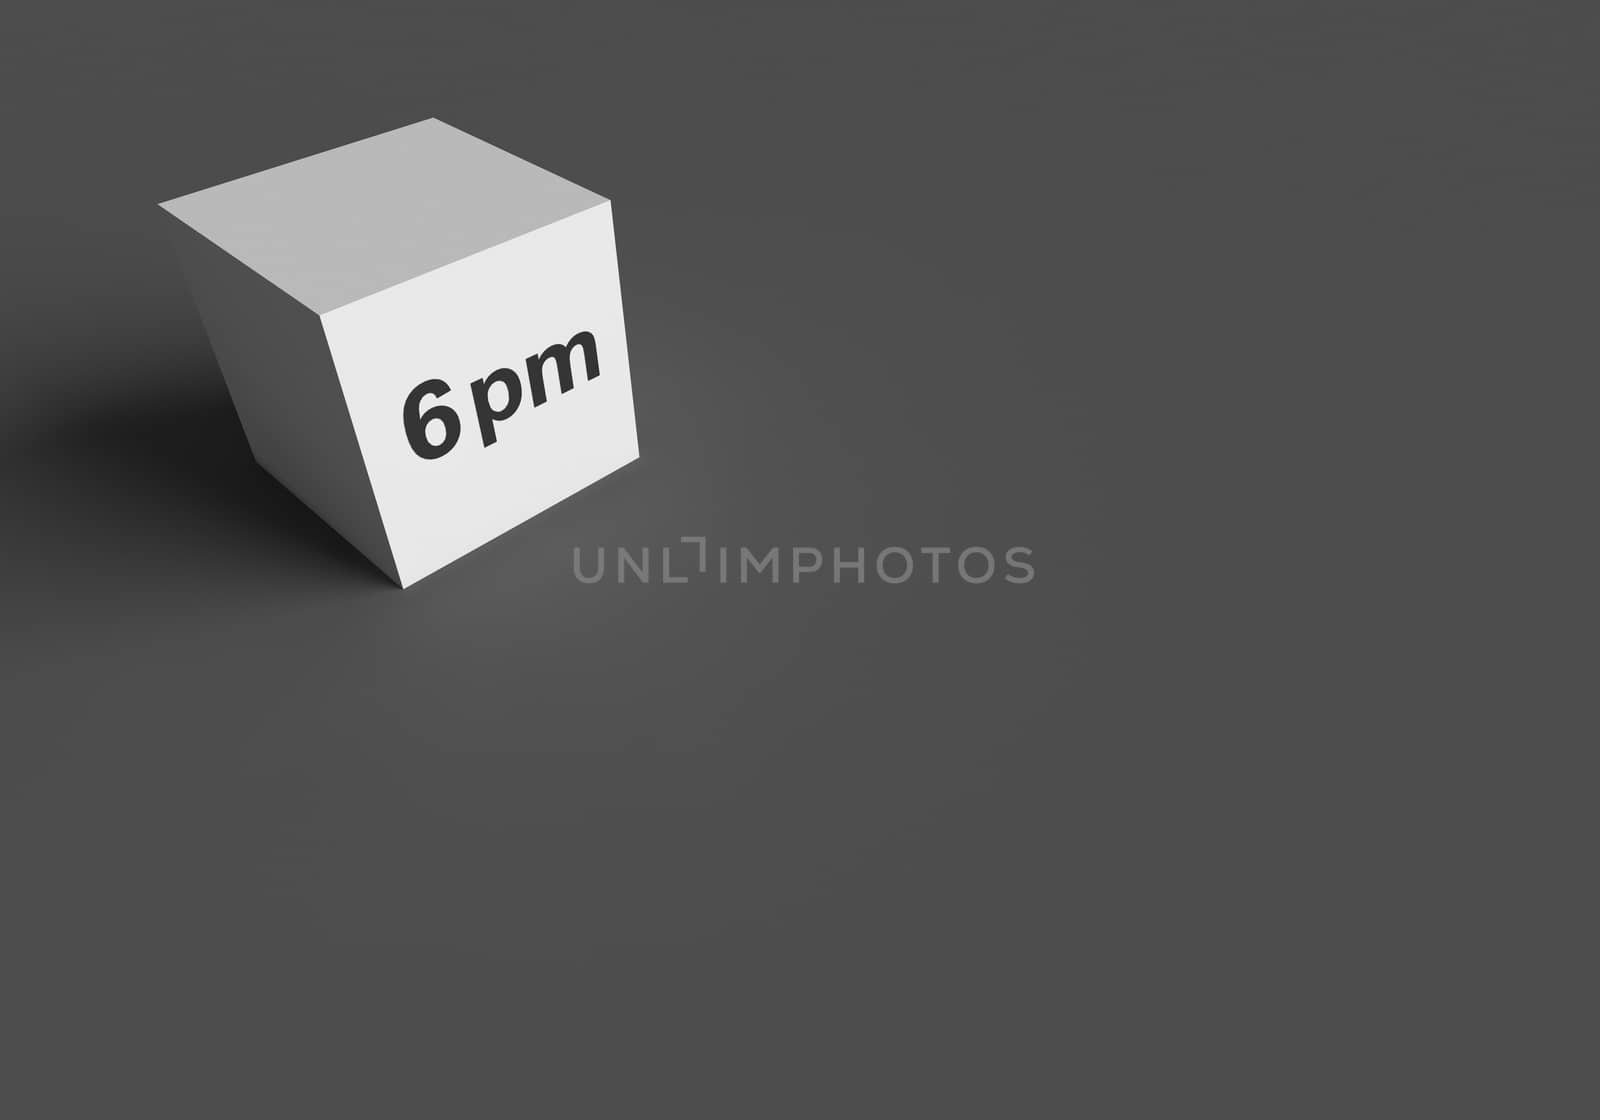 3D RENDERING WORDS 6 pm ON WHITE CUBE, STOCK PHOTO